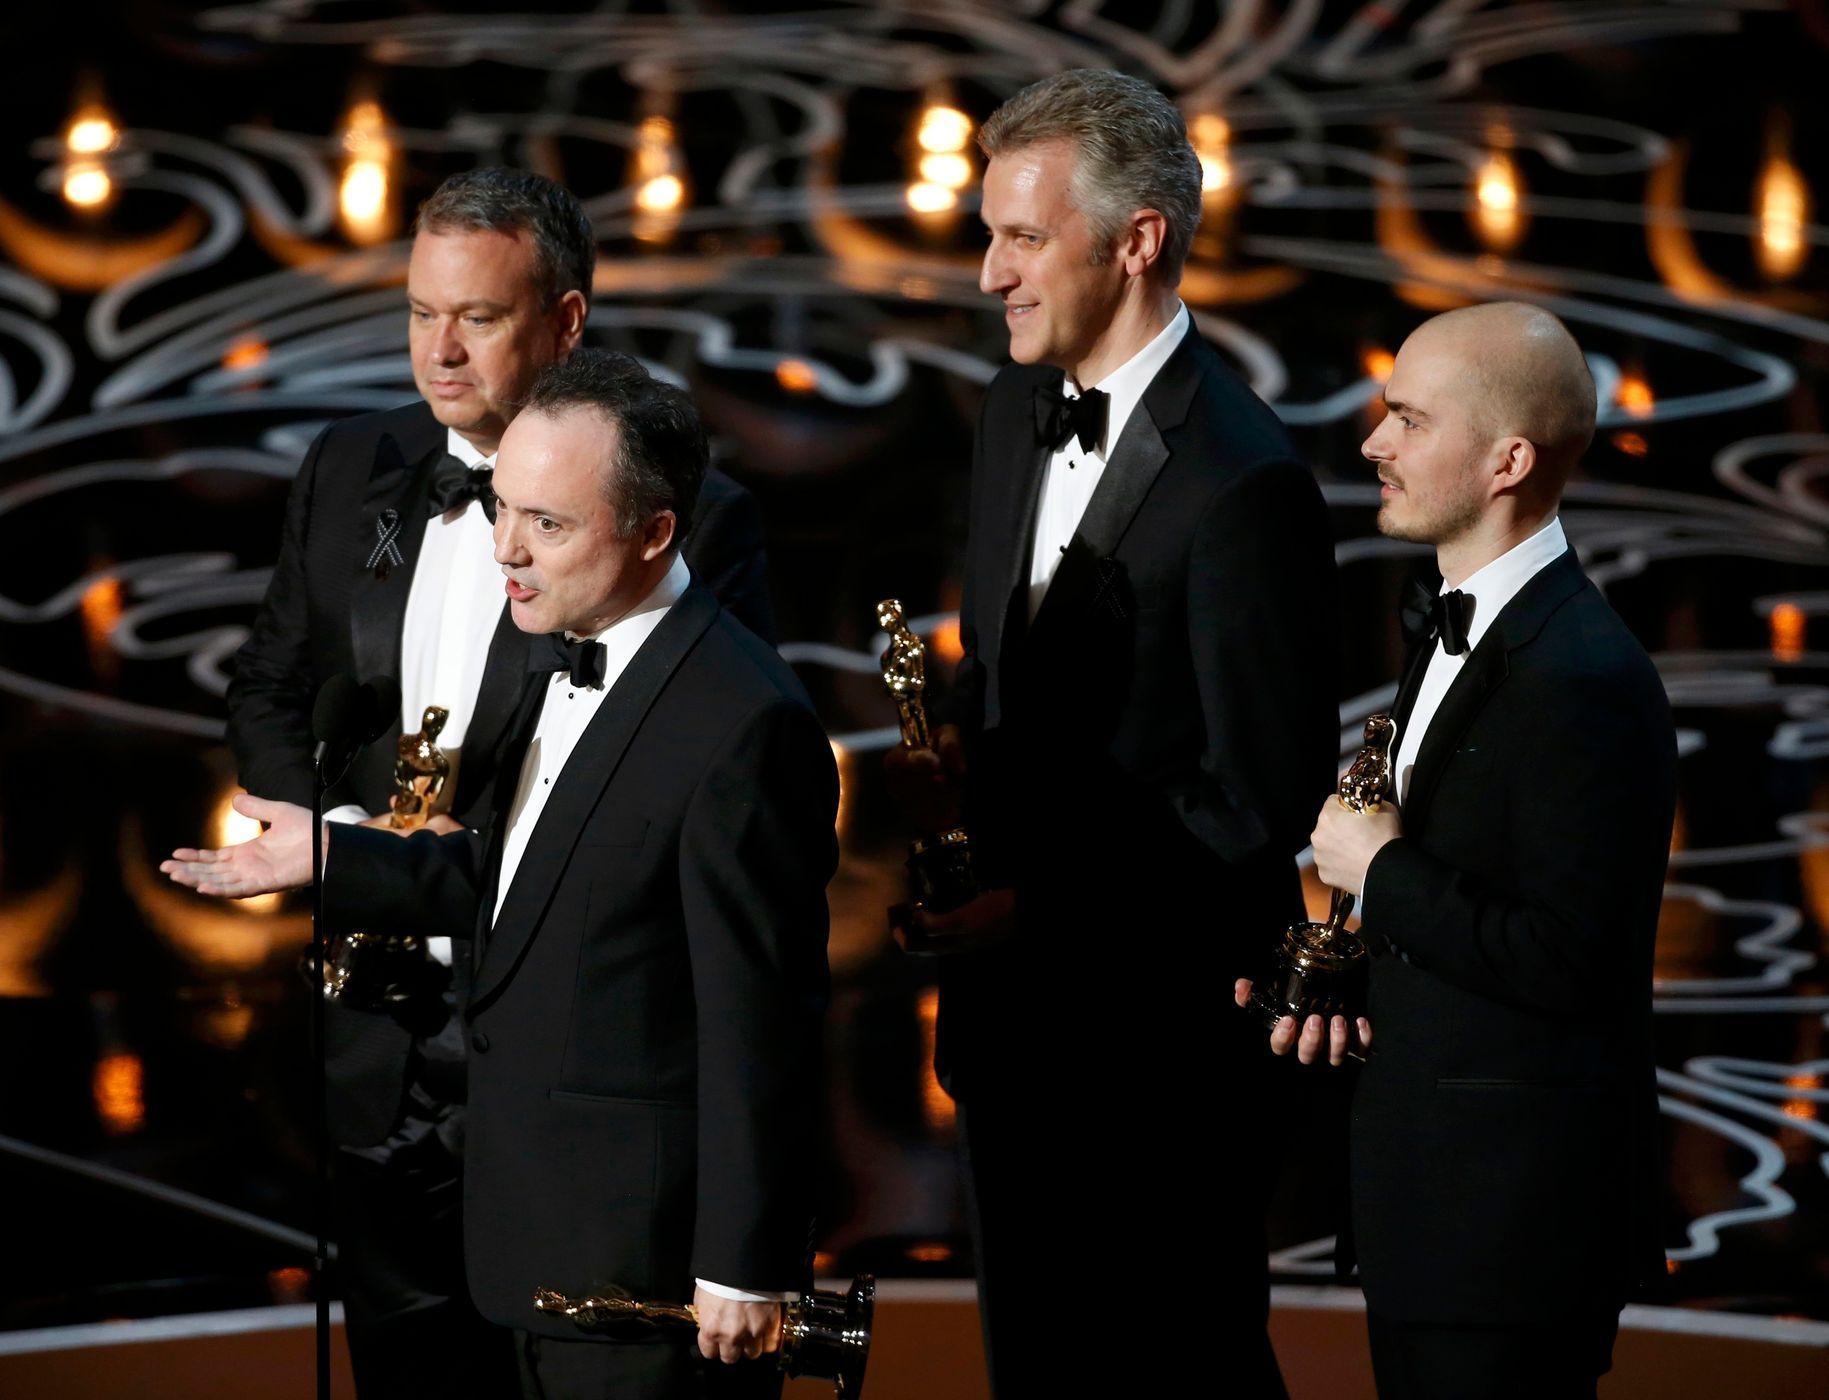 Webber, Lawrence, Shirk and Corbould accept the Oscar for visual effects for &quot;Gravity&quot; at the 86th Academy Awards in Hollywood